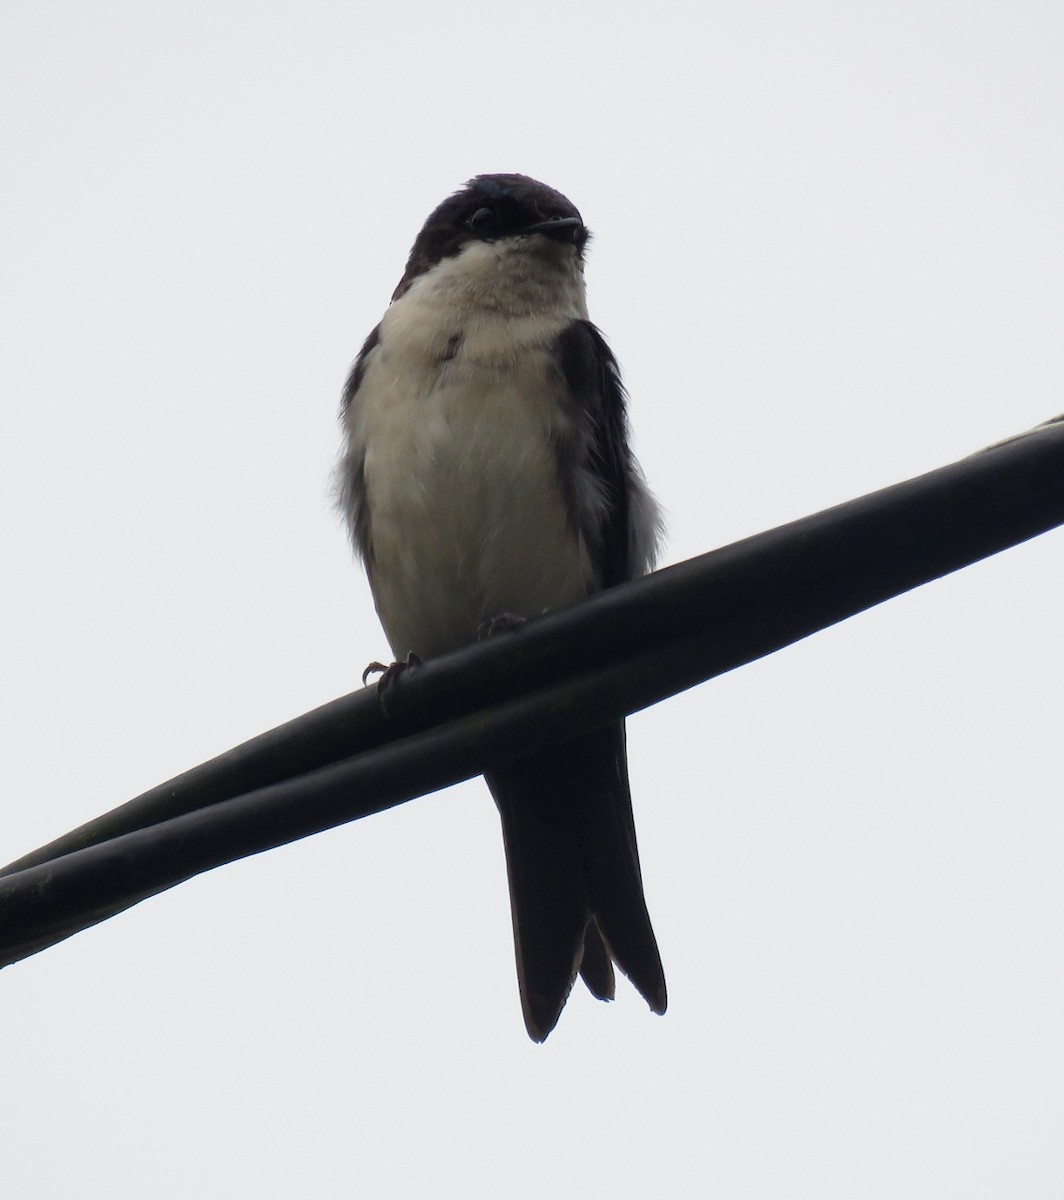 Blue-and-white Swallow (cyanoleuca) - Gustavo A. Rodriguez